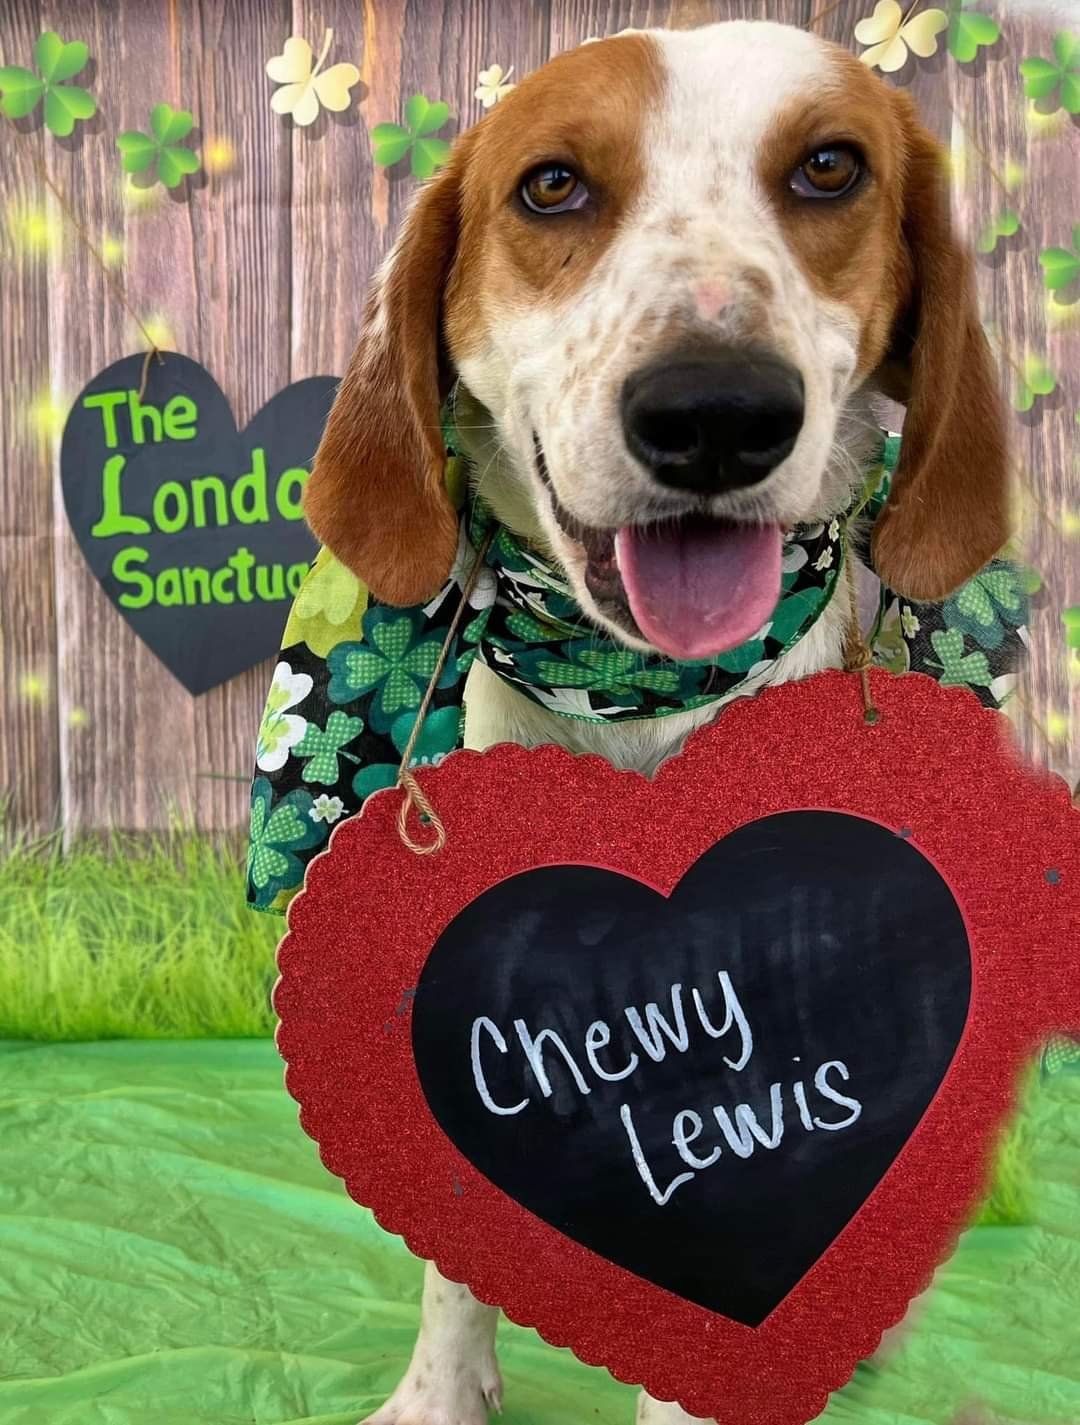 Chewy Lewis